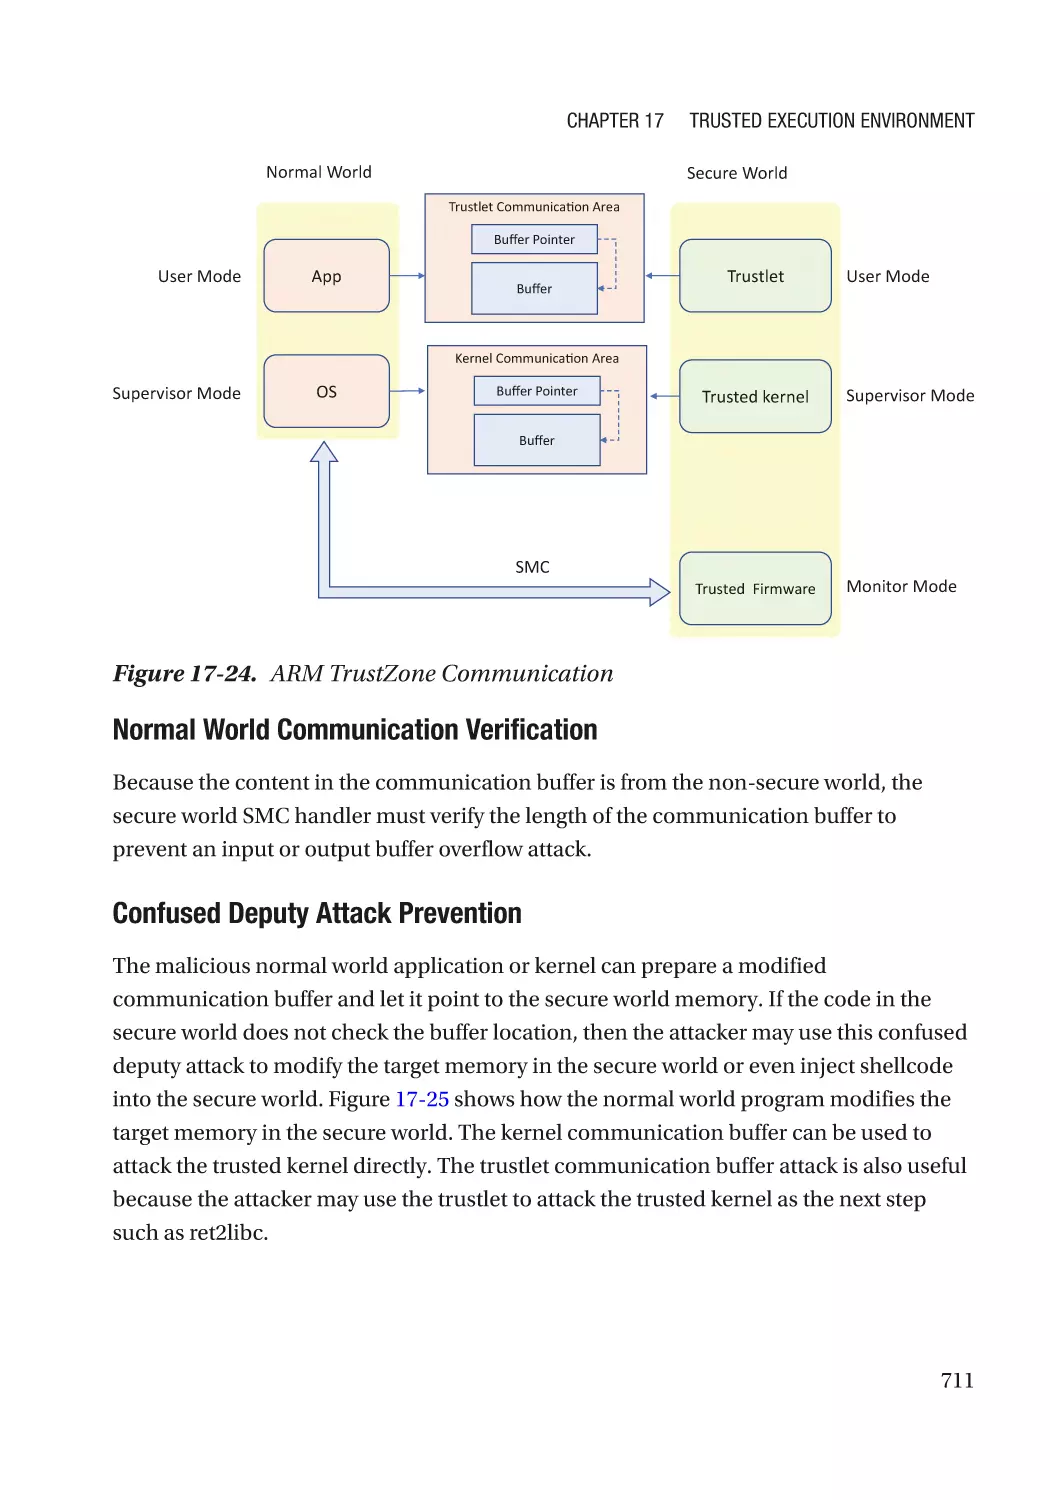 Normal World Communication Verification
Confused Deputy Attack Prevention